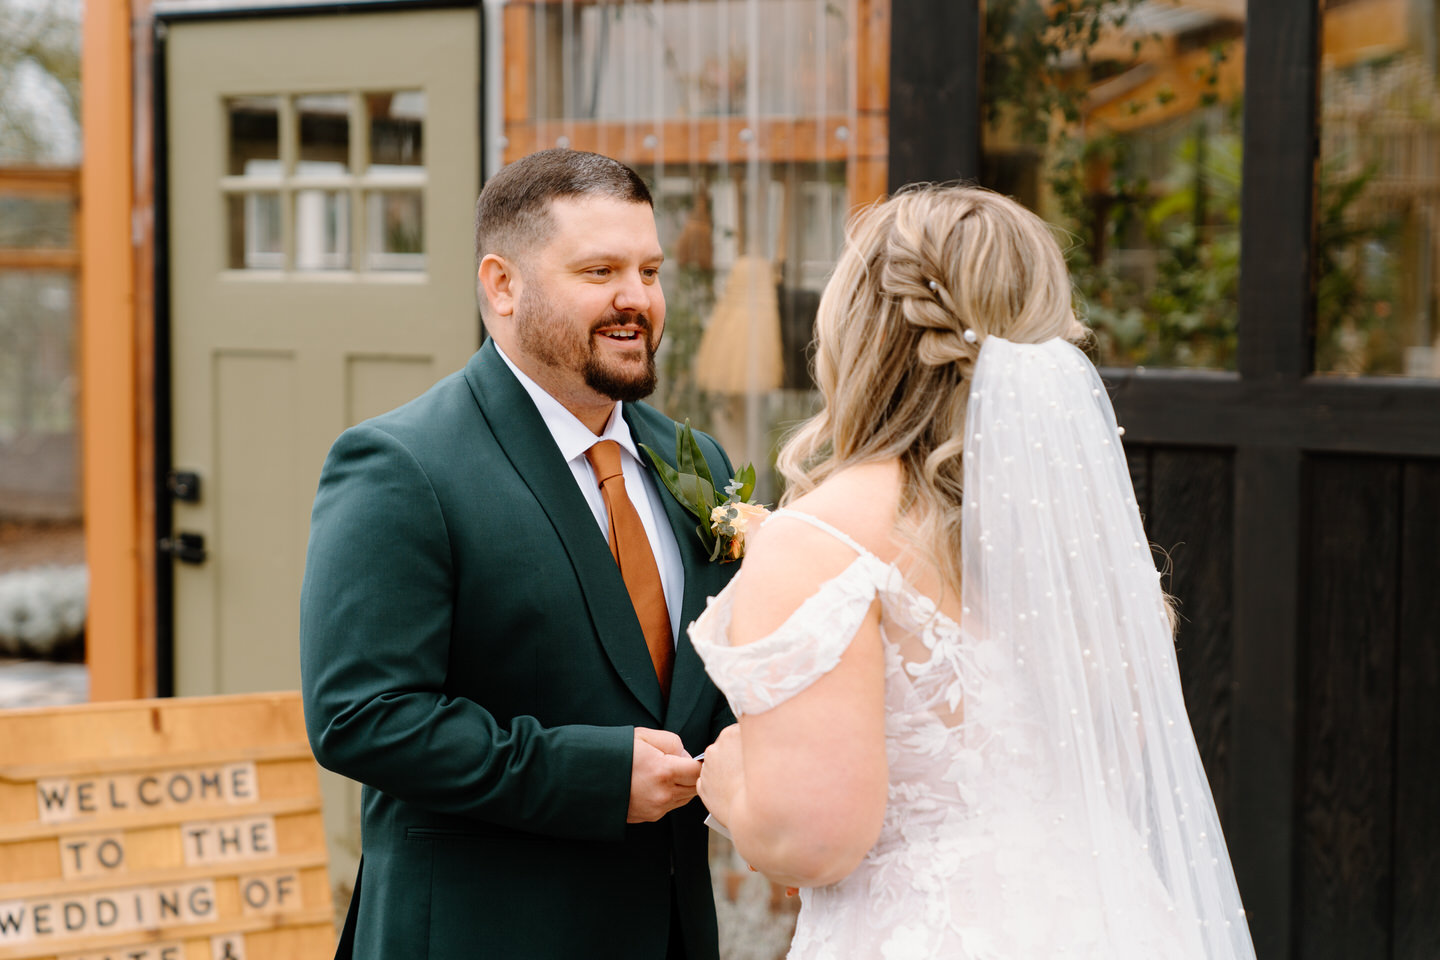 Groom reading private vows during first look at Mt Hood Center